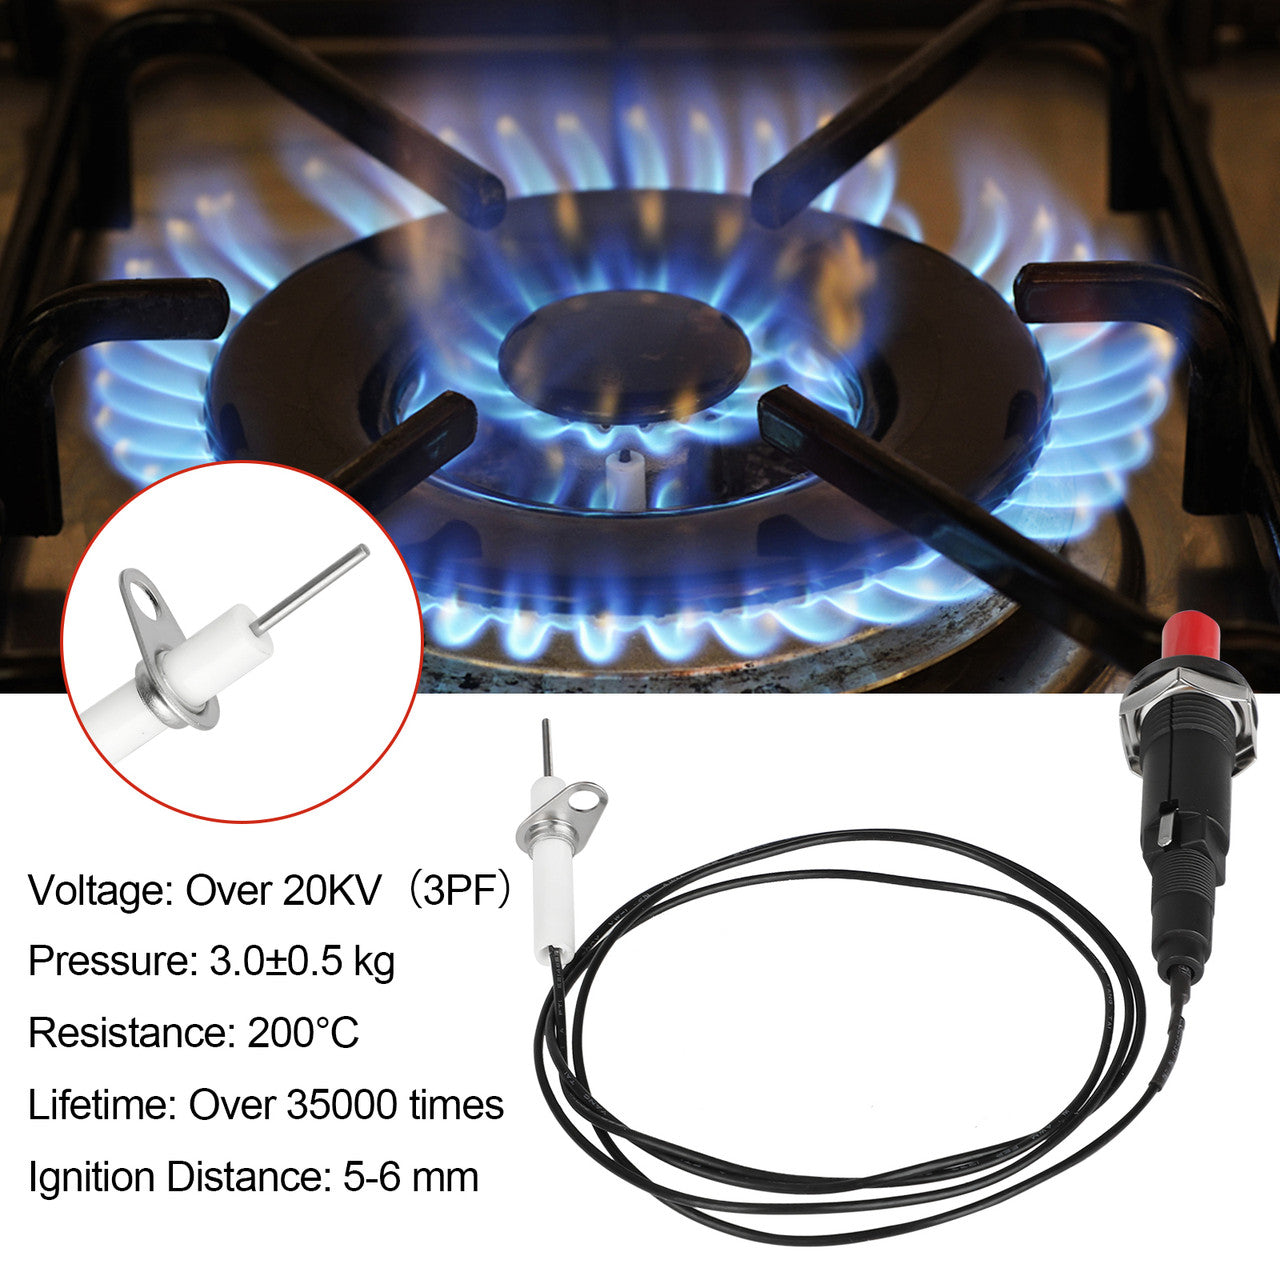 2 Sets Piezo Spark Ignition, Propane Push Button Piezo Igniter with Threaded Ceramic Electrode Ignition Plug Wire 100cm 200 Degree Resistance, Fit for Gas Fireplace, Oven, Heater, Kitchen lgniter